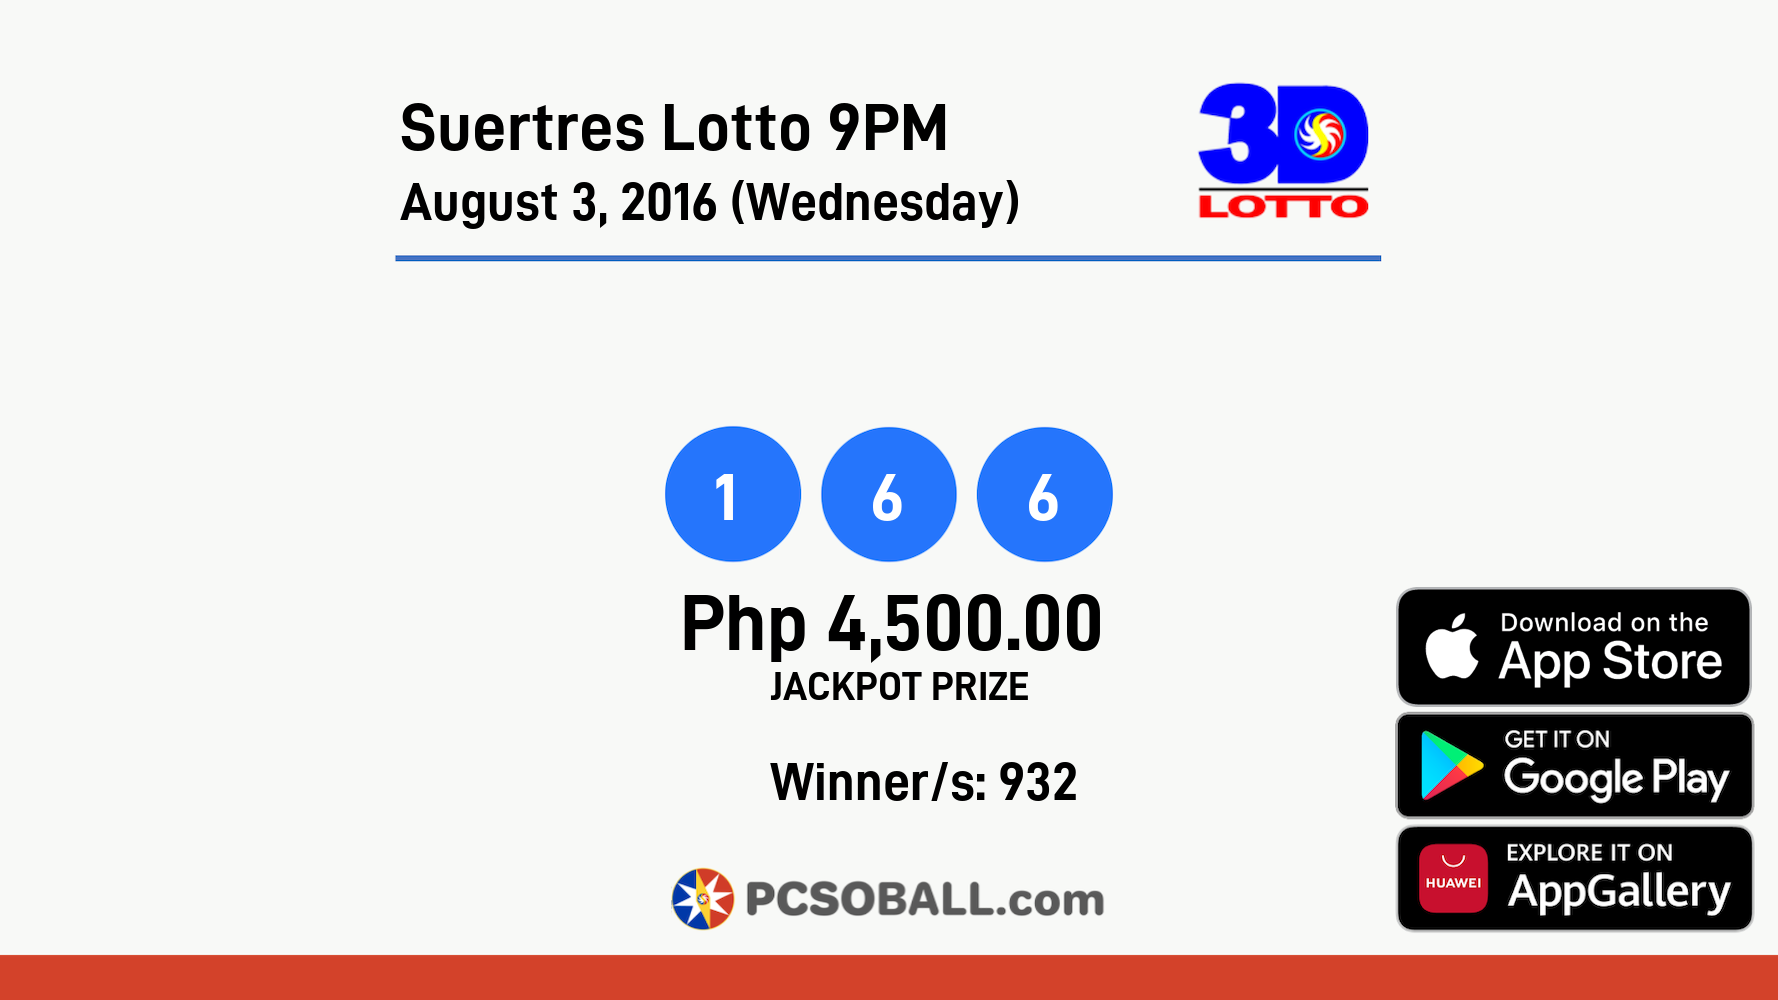 Suertres Lotto 9PM August 3, 2016 (Wednesday) Result